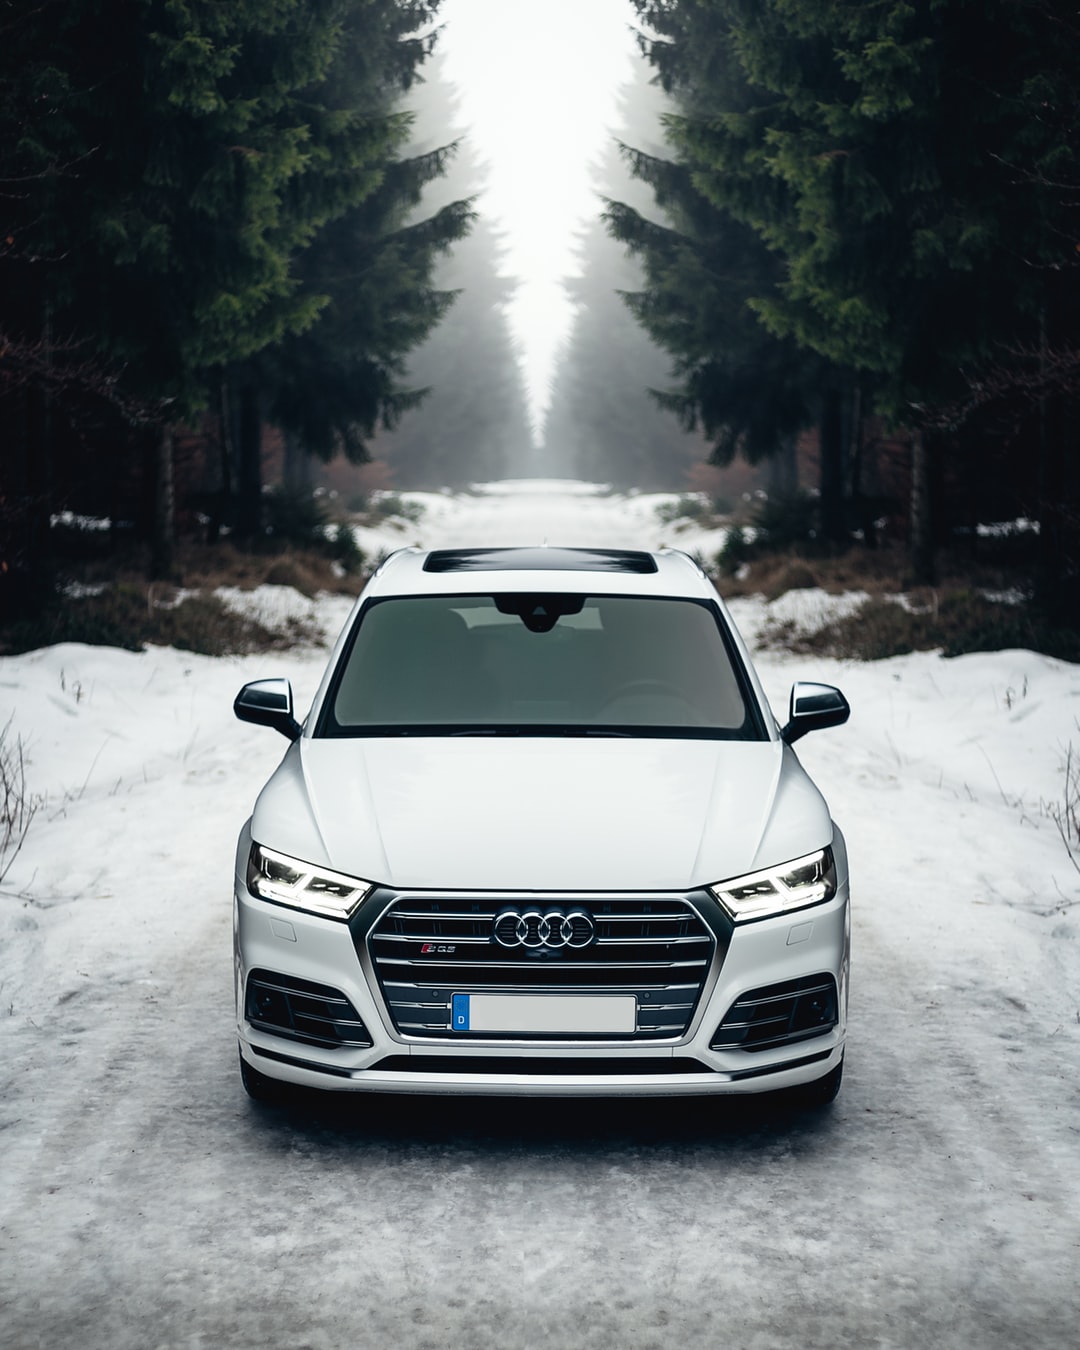 Audi Pictures HD Image